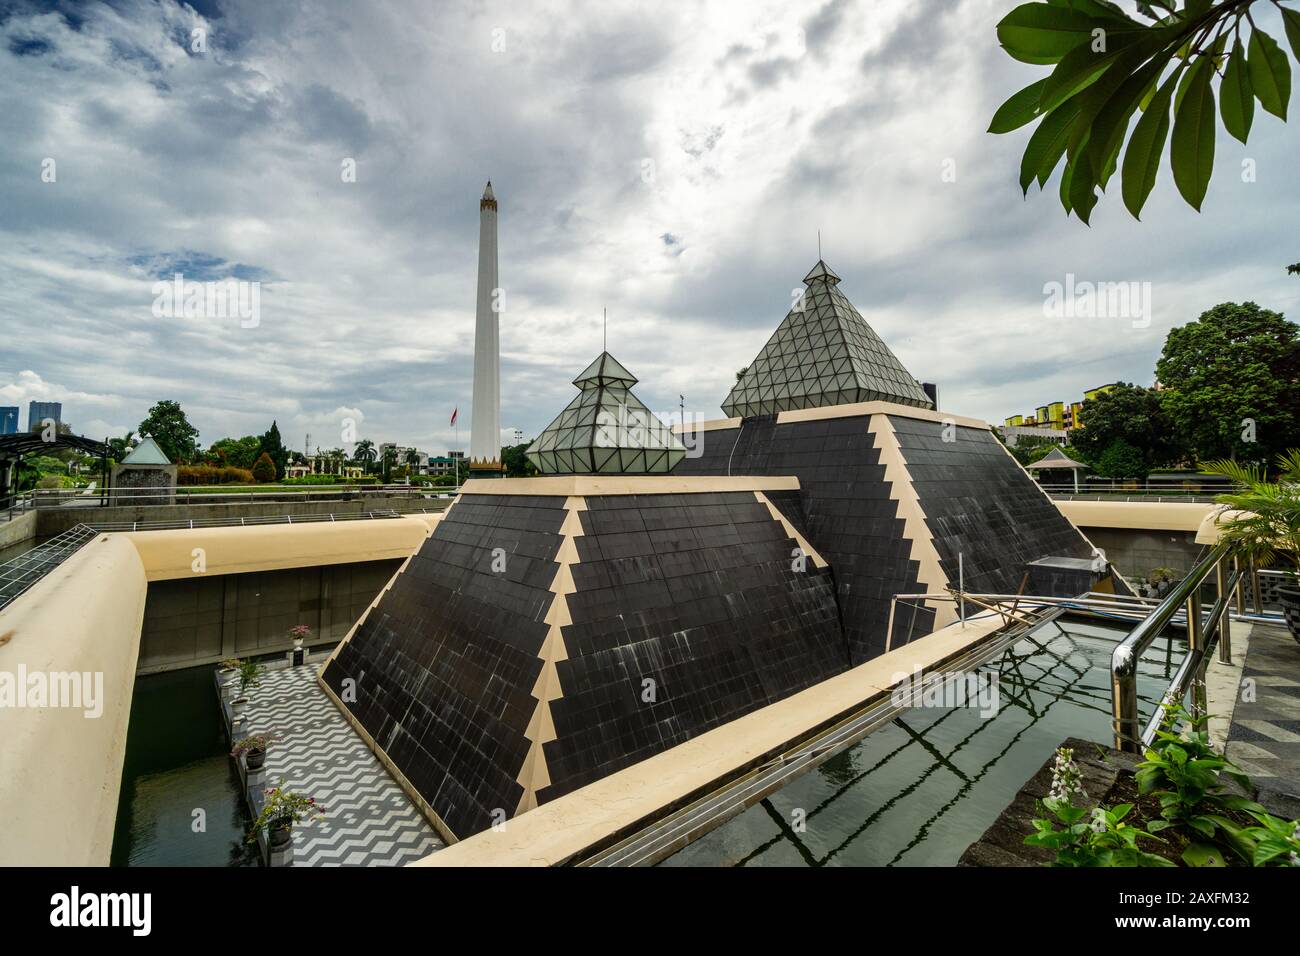 Heroes Monument and Museum in Surabaya, East Java, Indonesia Stock Photo